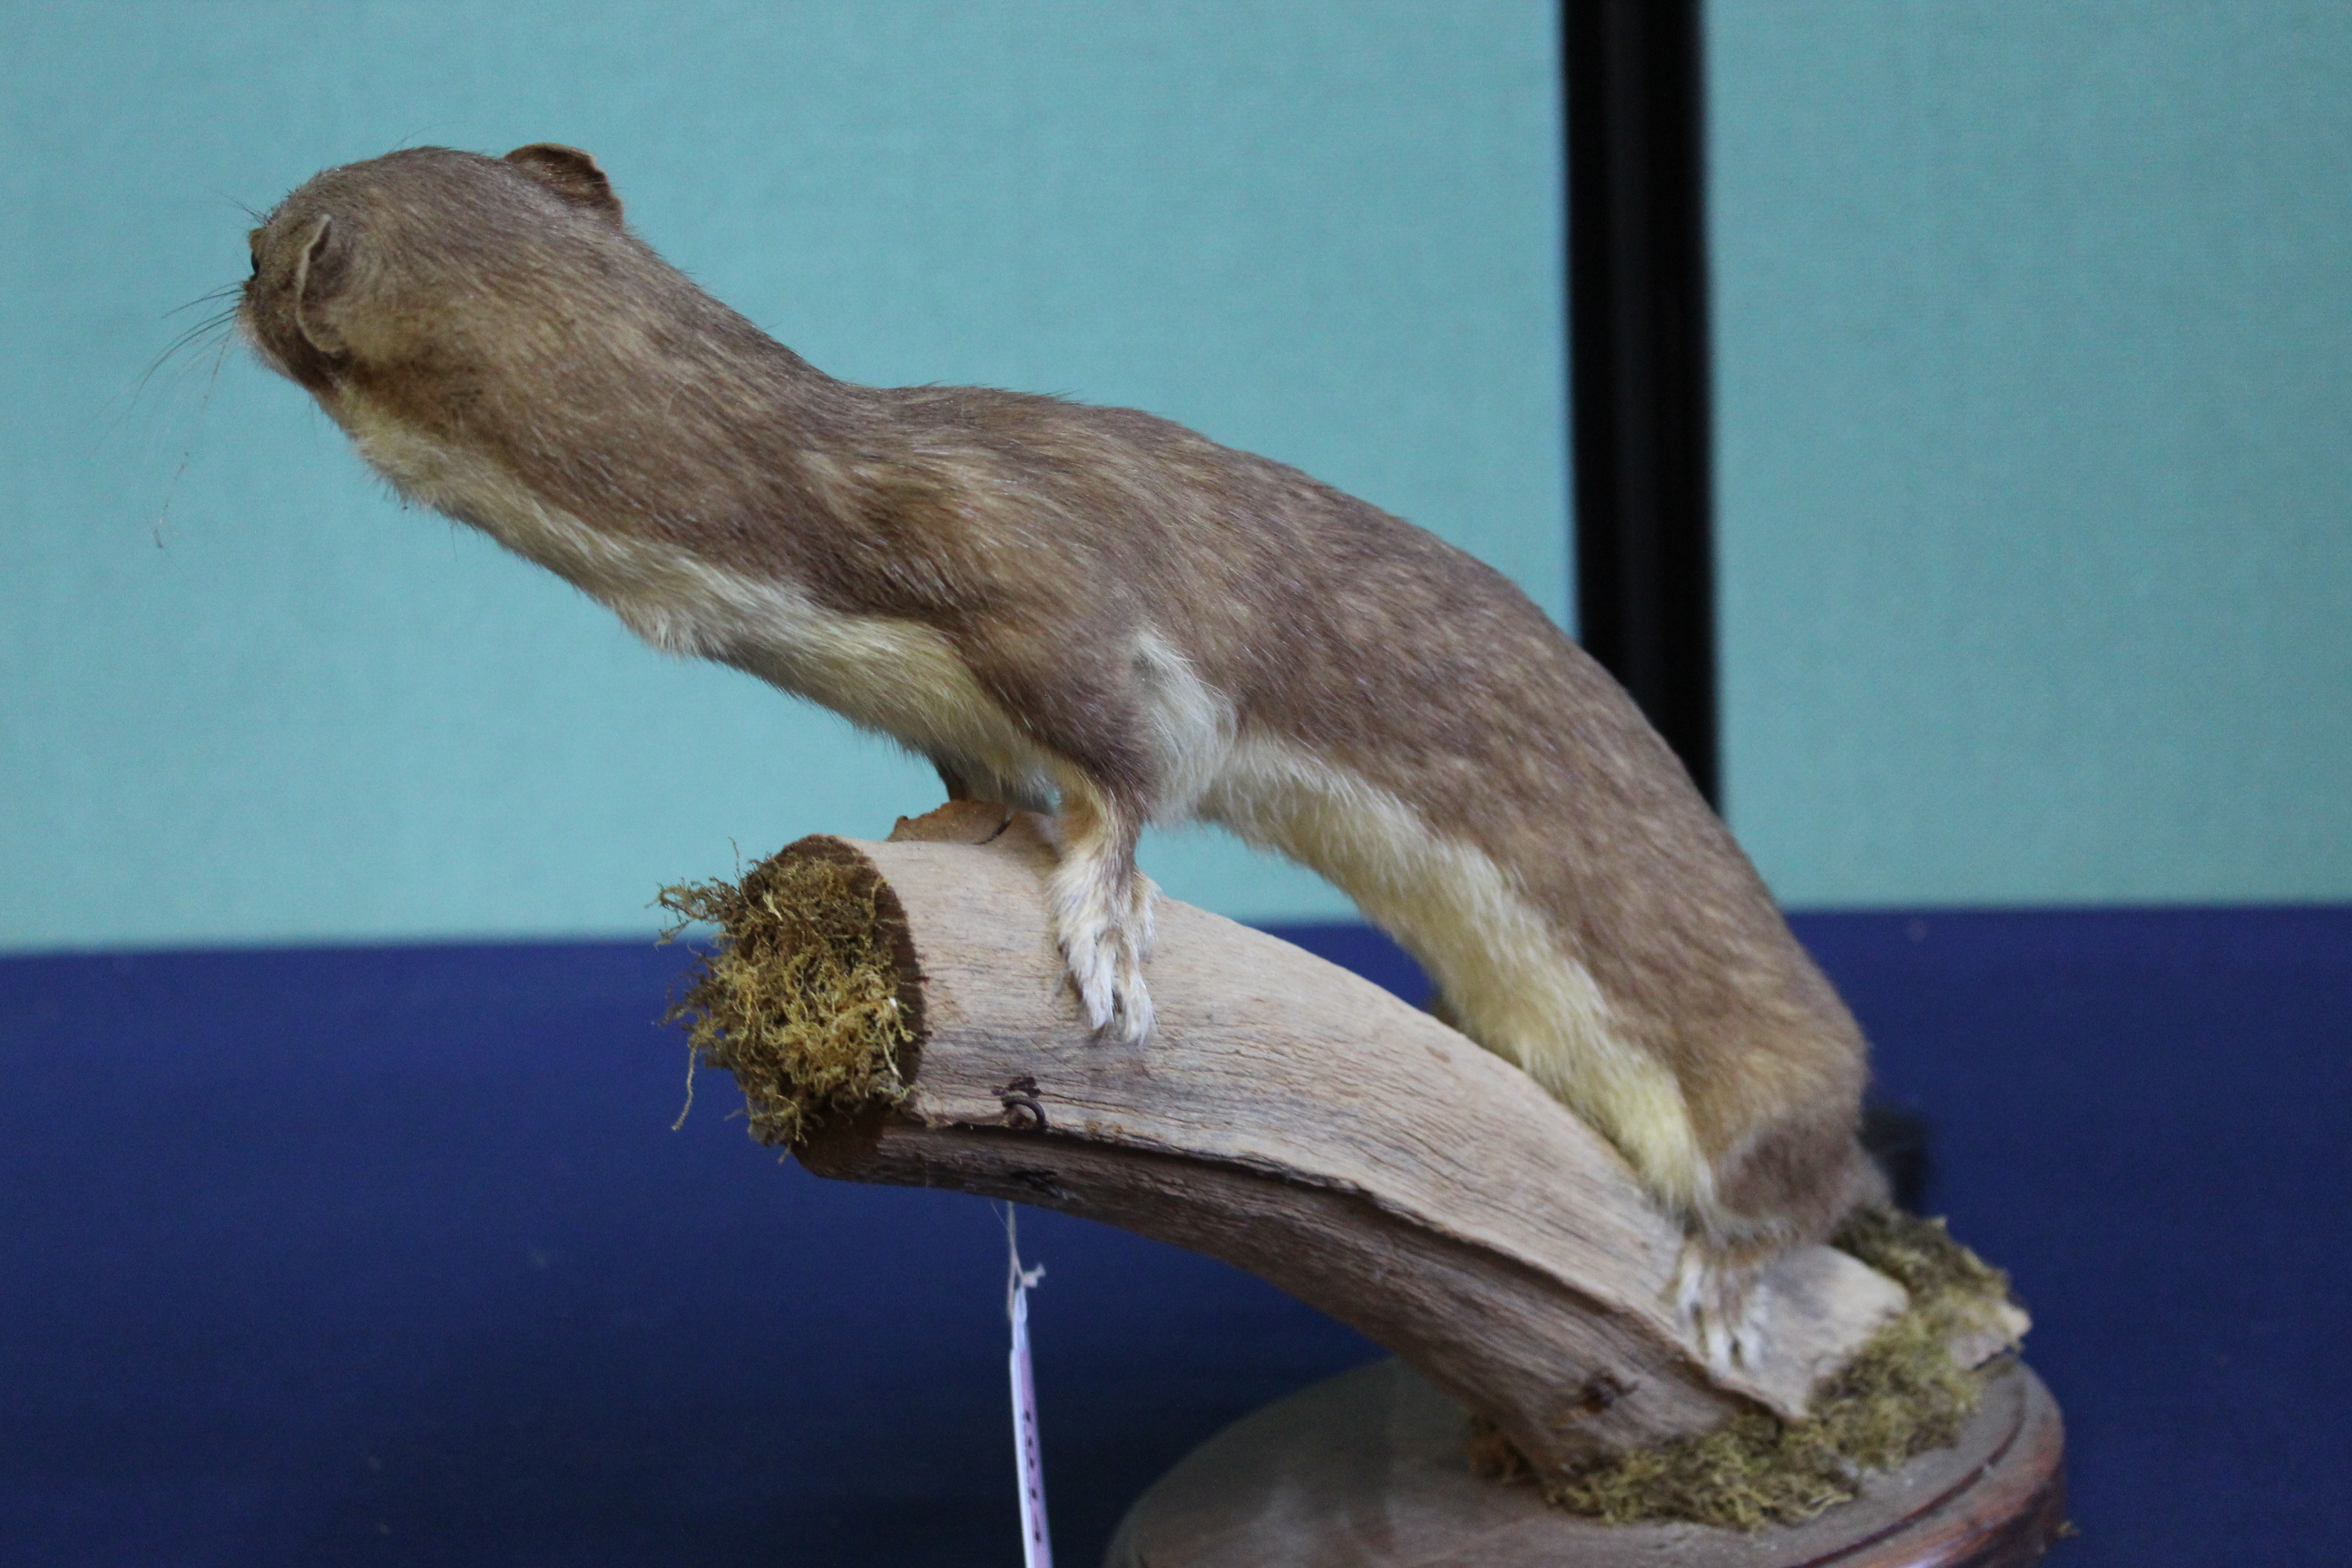 A taxidermy stoat mounted on its naturalistic branch setting - Image 3 of 3